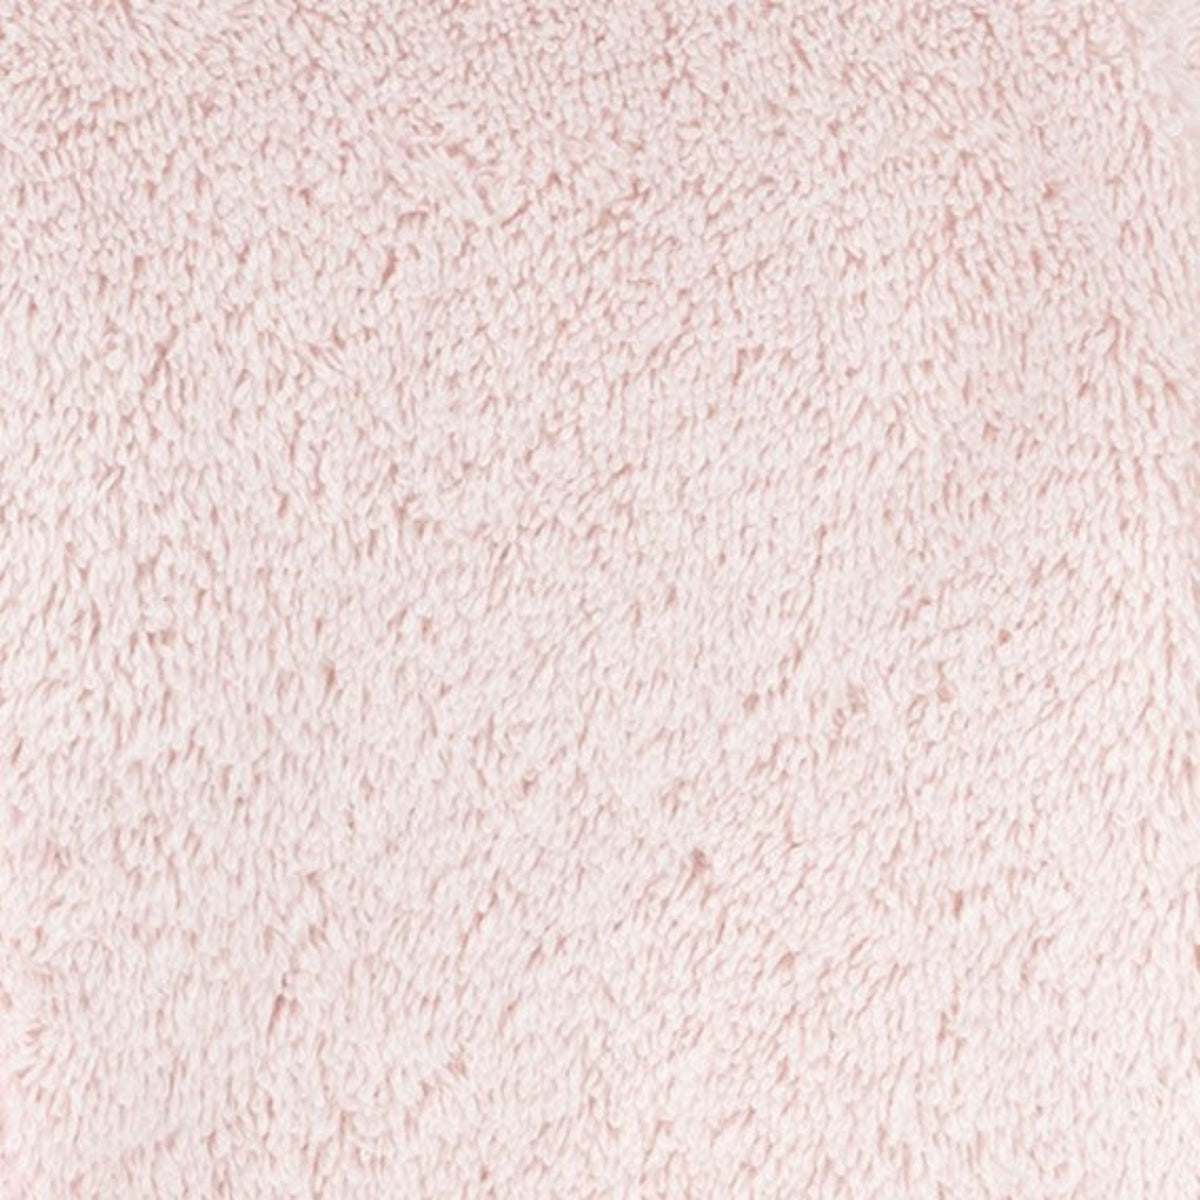 Sample Image of Matouk Cairo Bath Towels Swatch in Blush/Blush Color